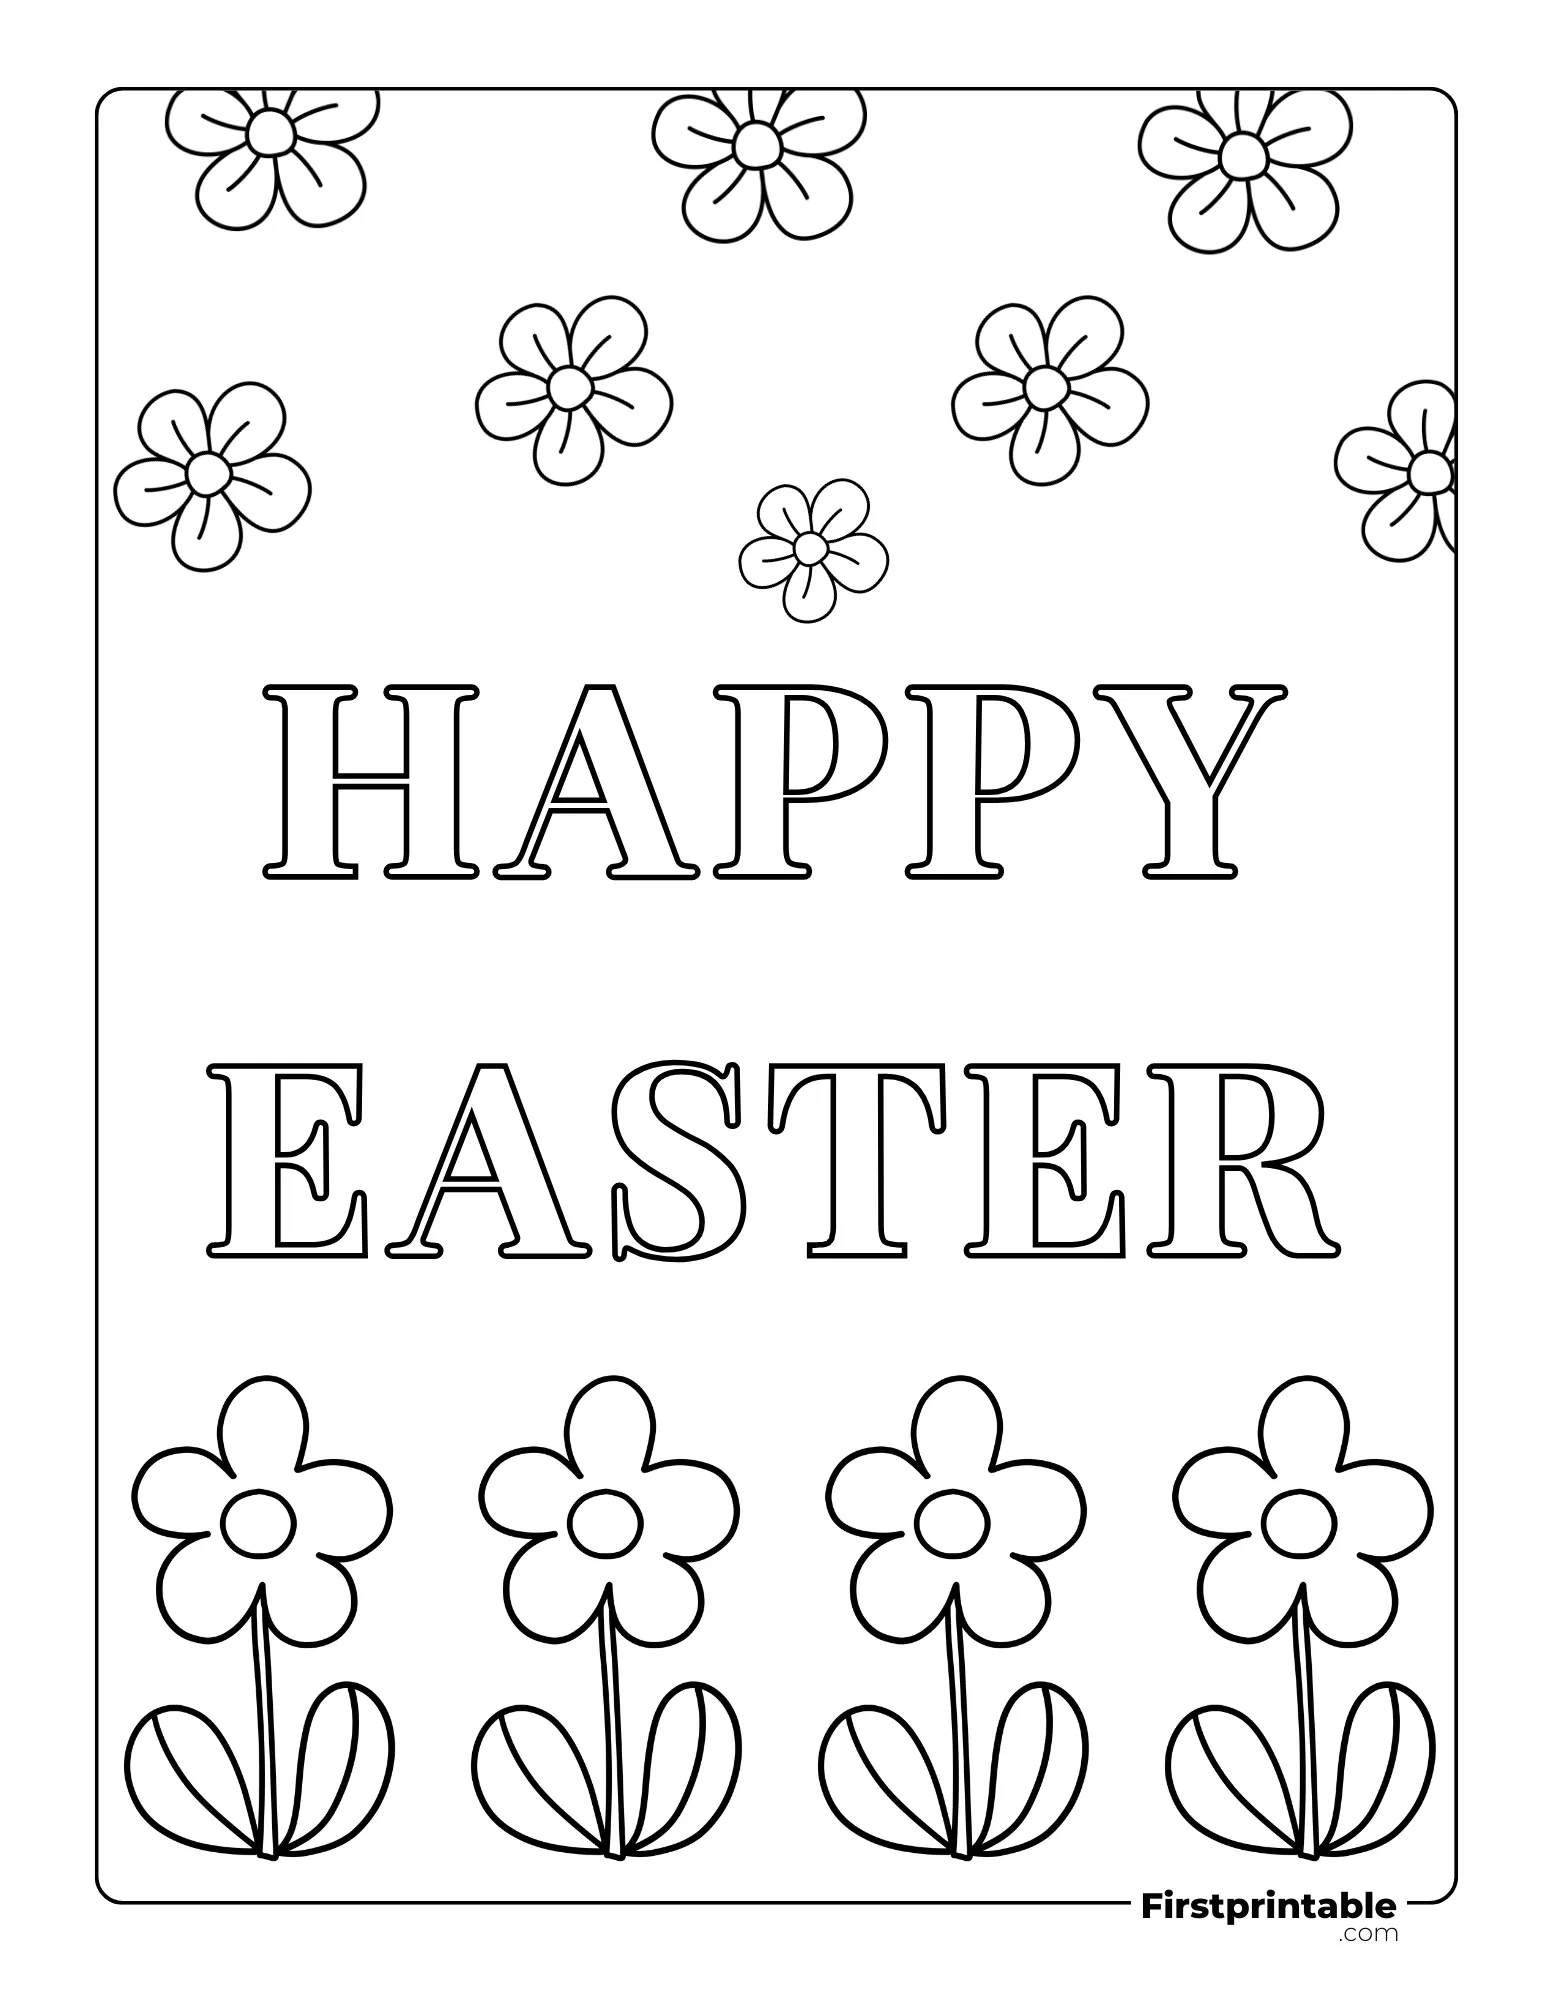 Happy Easter coloring page 1